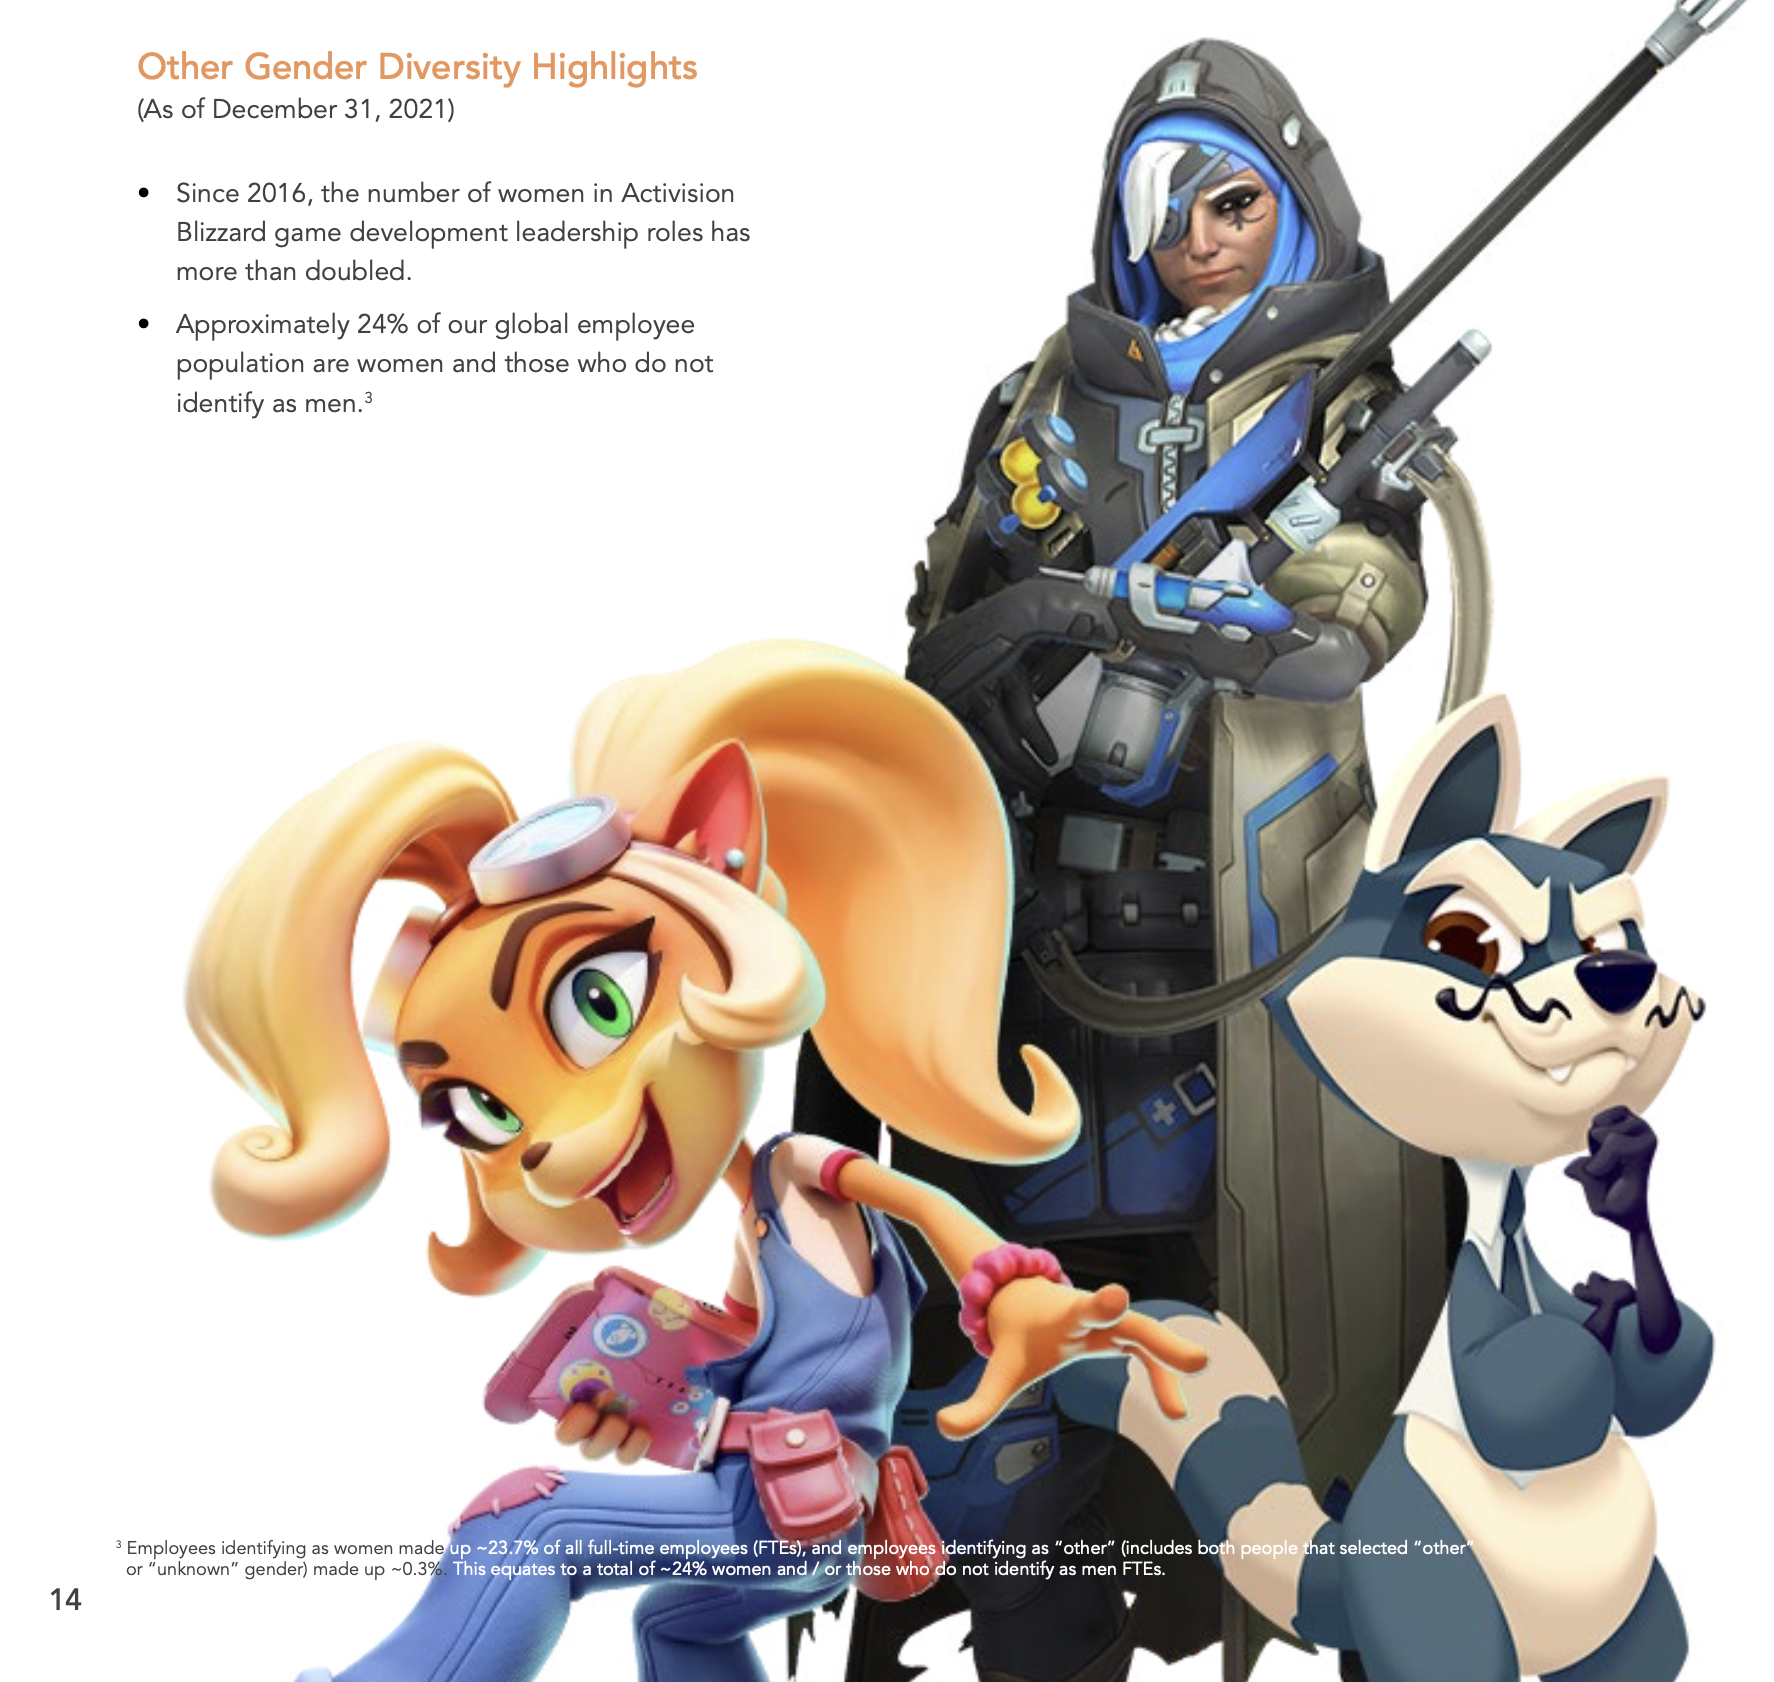 Three female characters from Blizzard games, a cartoon fox, a cartoon racoon, and Anna from Overwatch.